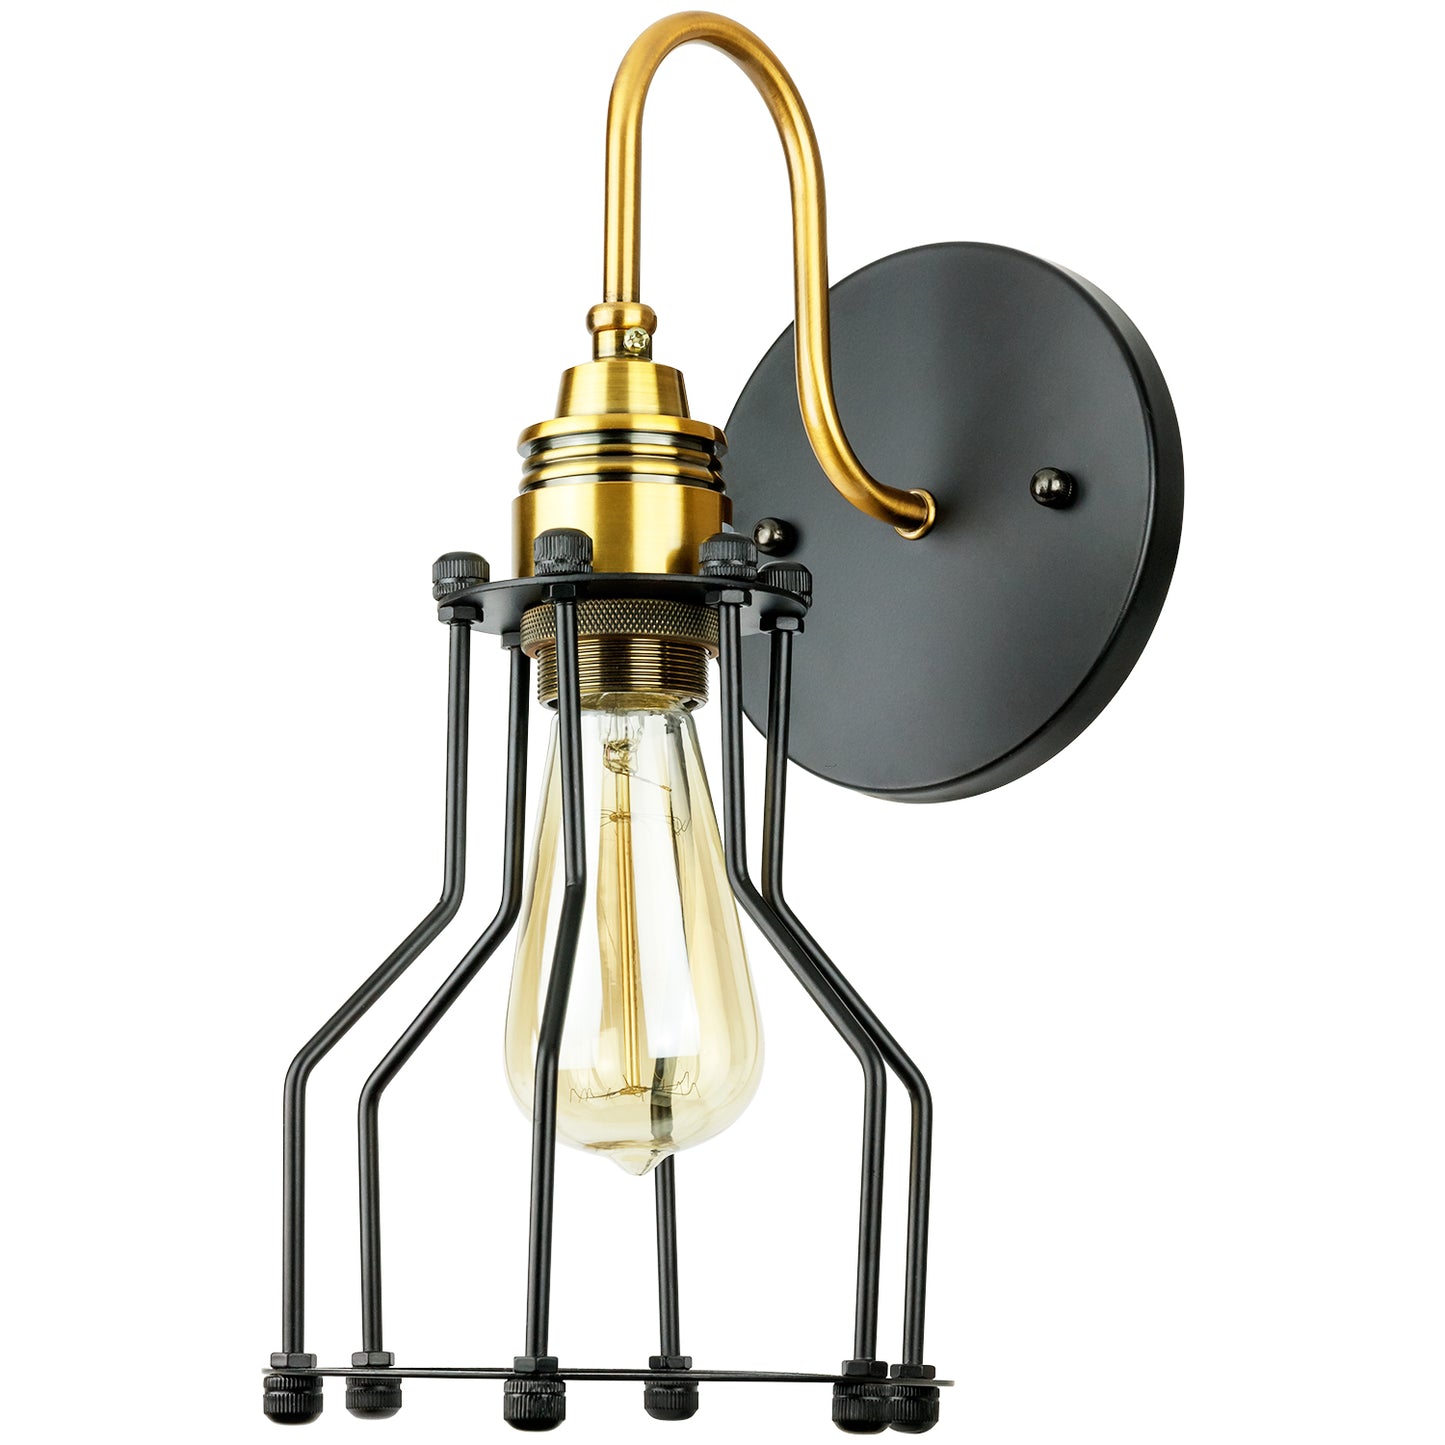 Sunlite - Vintage Designed Open Cage Wall Sconce, Metal Industrial Style Fixture